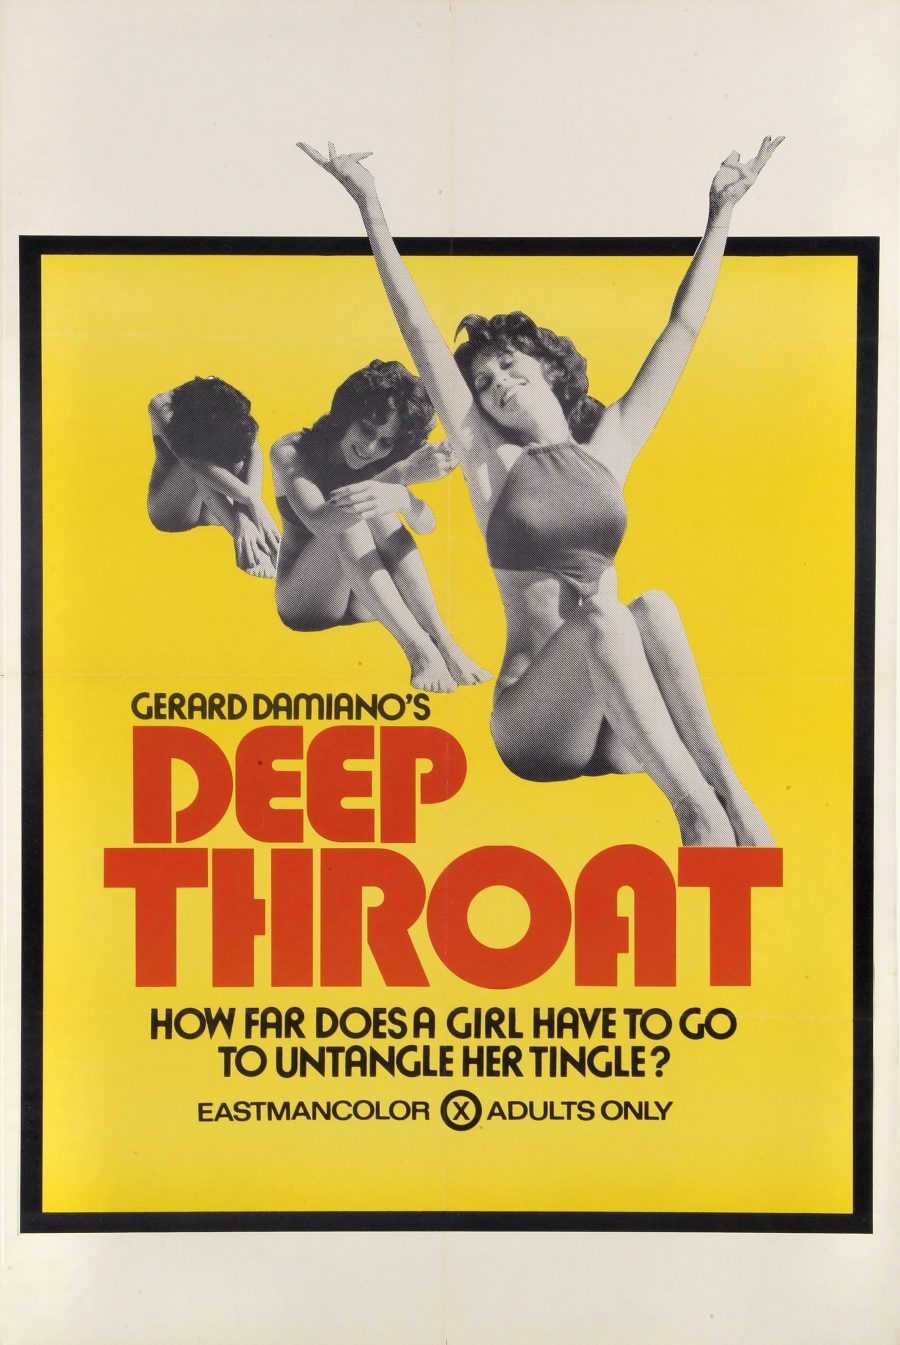 70s Adult Xxx - Check out these X-rated adult movie posters from the '60s and '70s